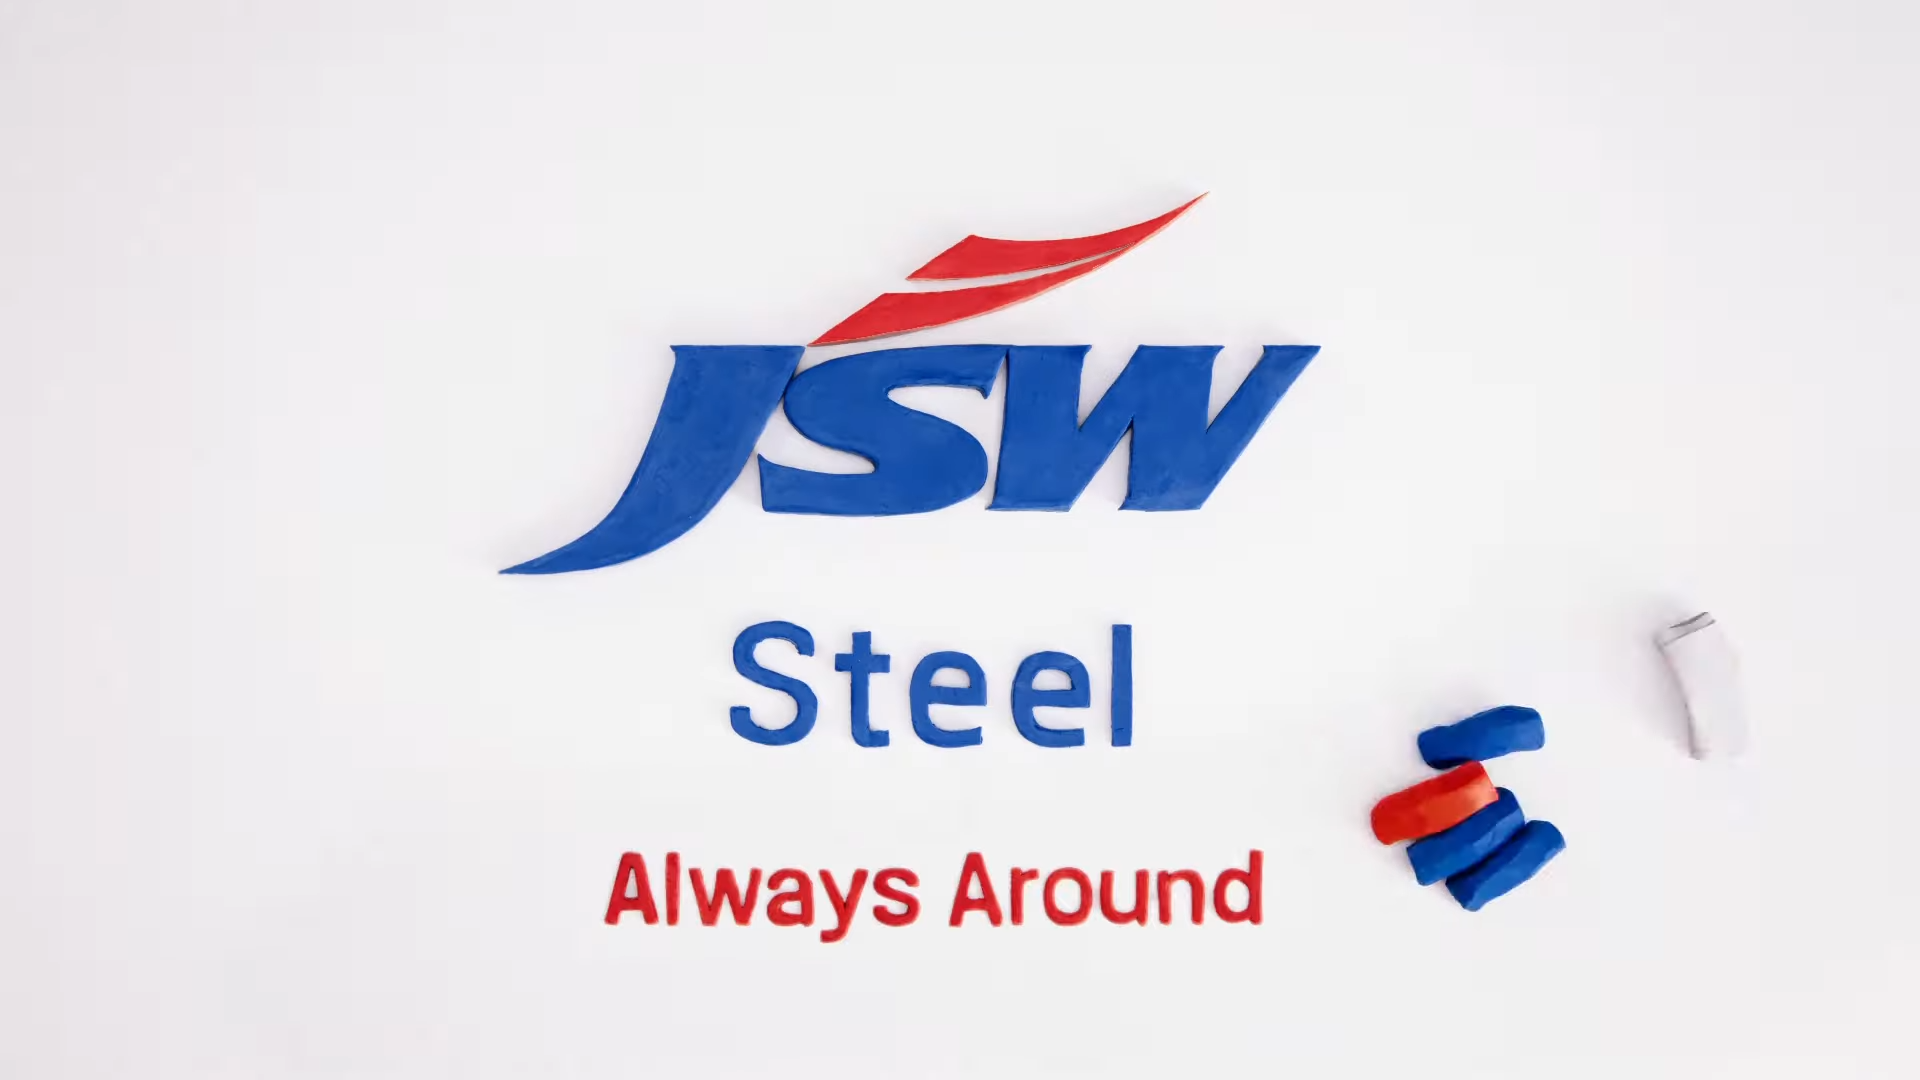 JSW Steel Launches New Corporate Campaign 'Always Around'